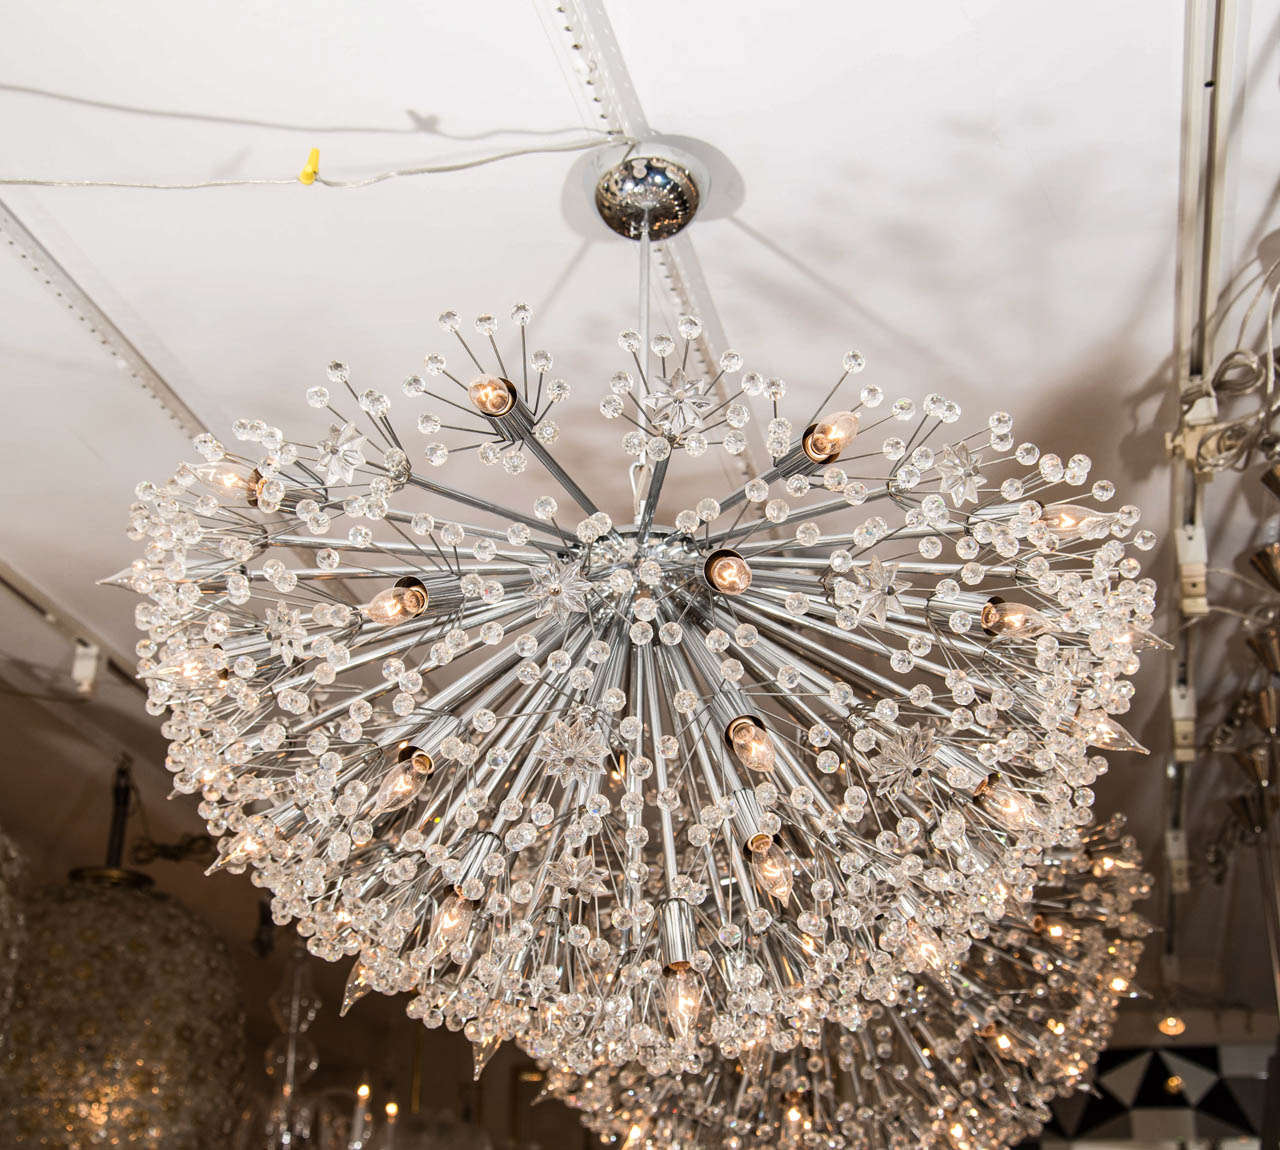 Monumental polished nickel half starburst chandeliers with glass stars and flowers by Emil Stejnar.